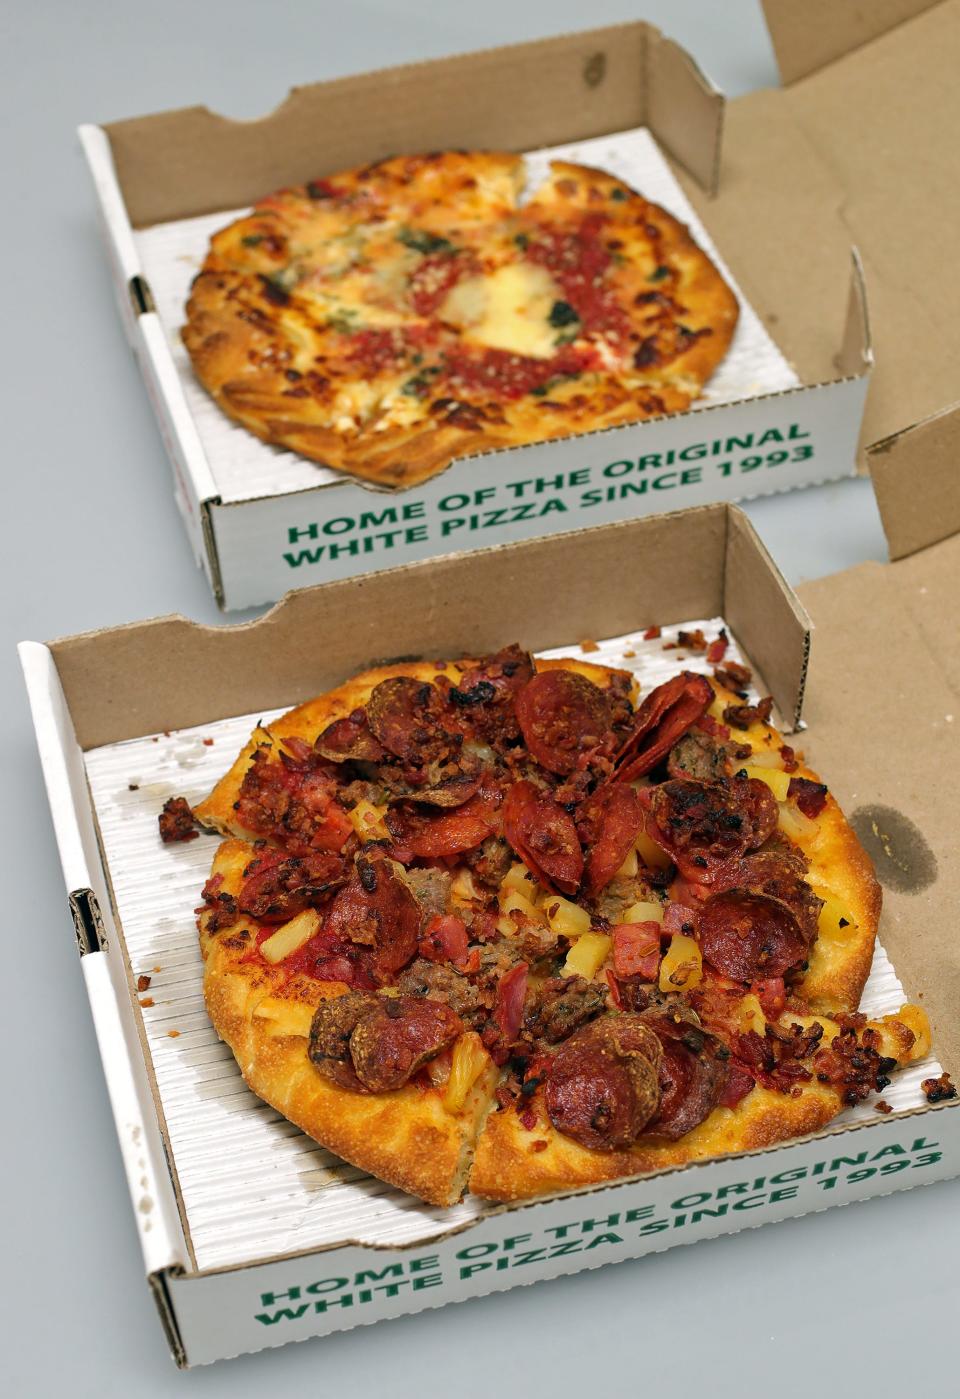 A small meat lovers pizza ordered special with pineapple instead of cheese from DeCheco's.